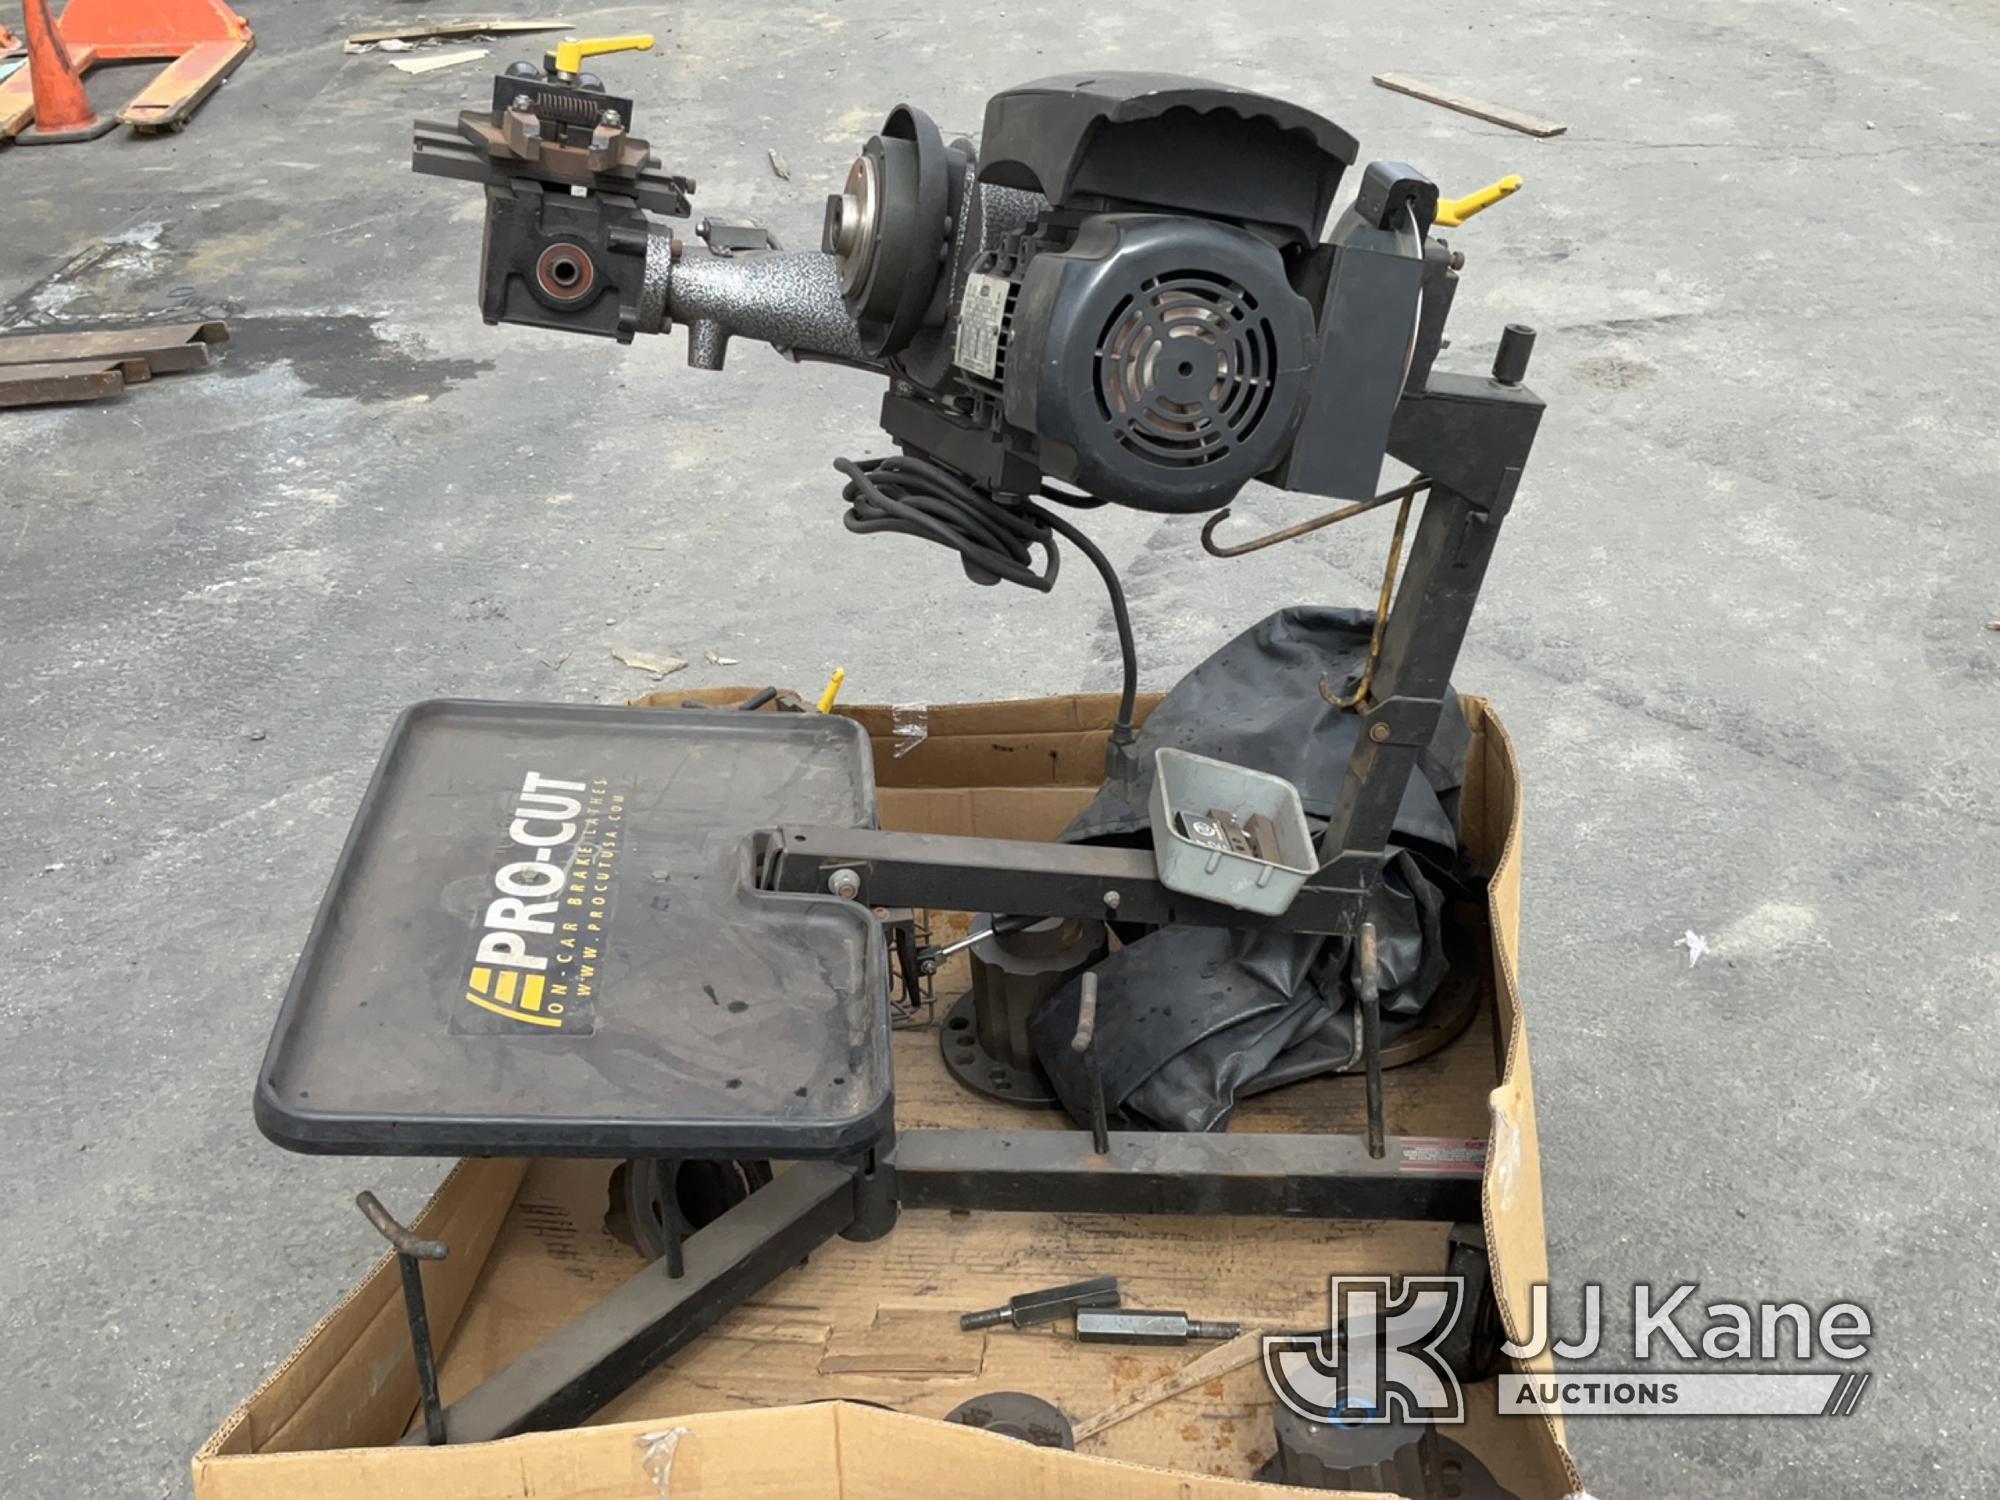 (Jurupa Valley, CA) 1 Pro-Cut On Car Brake Lathe (Used ) NOTE: This unit is being sold AS IS/WHERE I